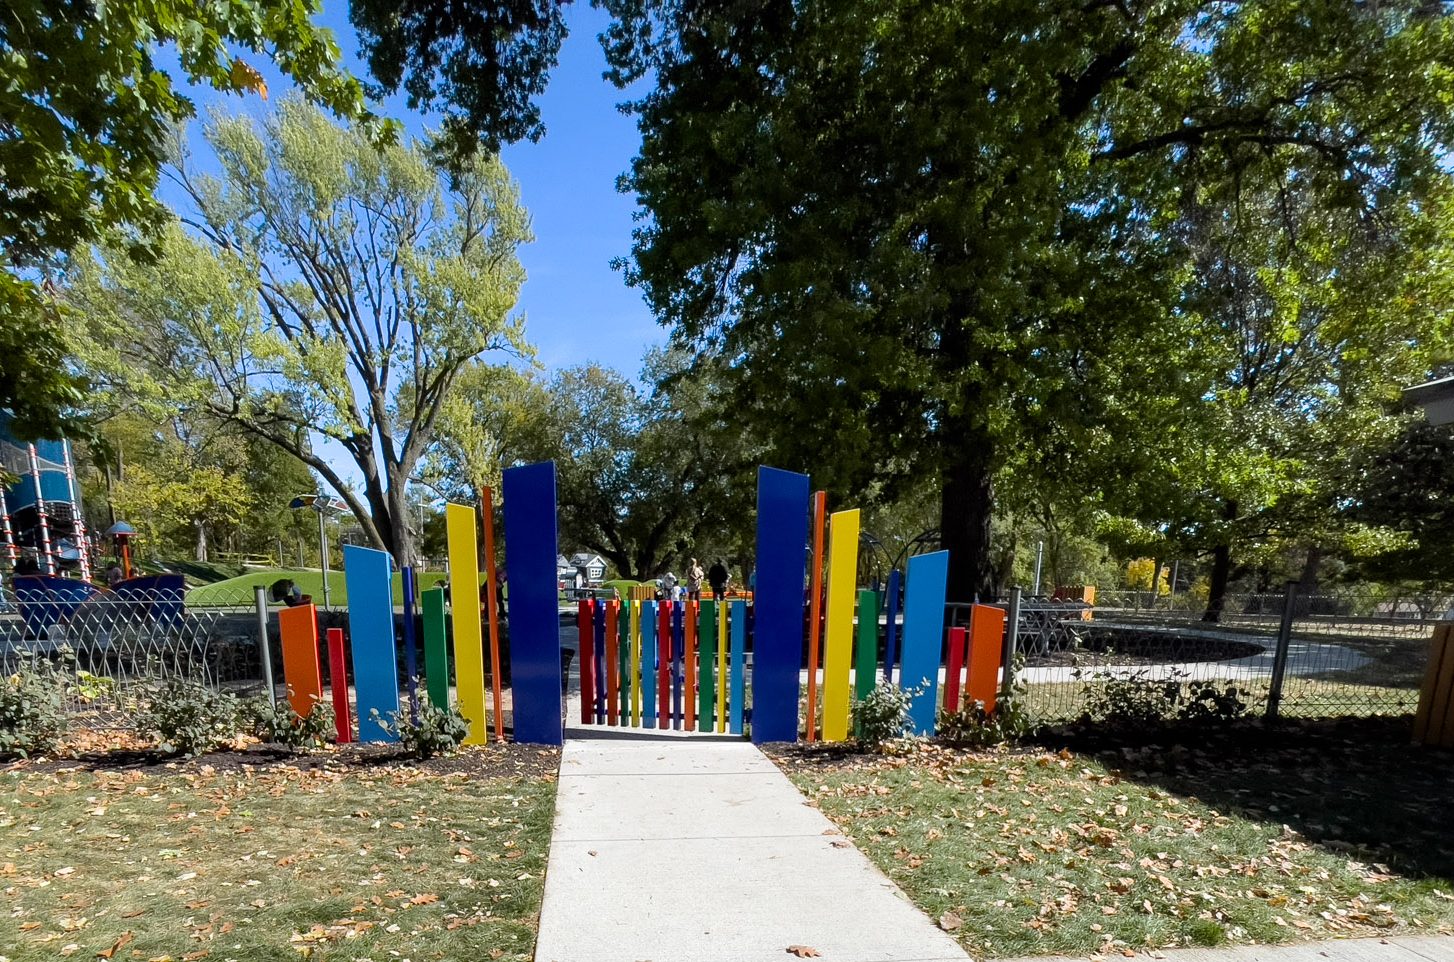 front gate of Strang park colorful blue, yellow, orange panels